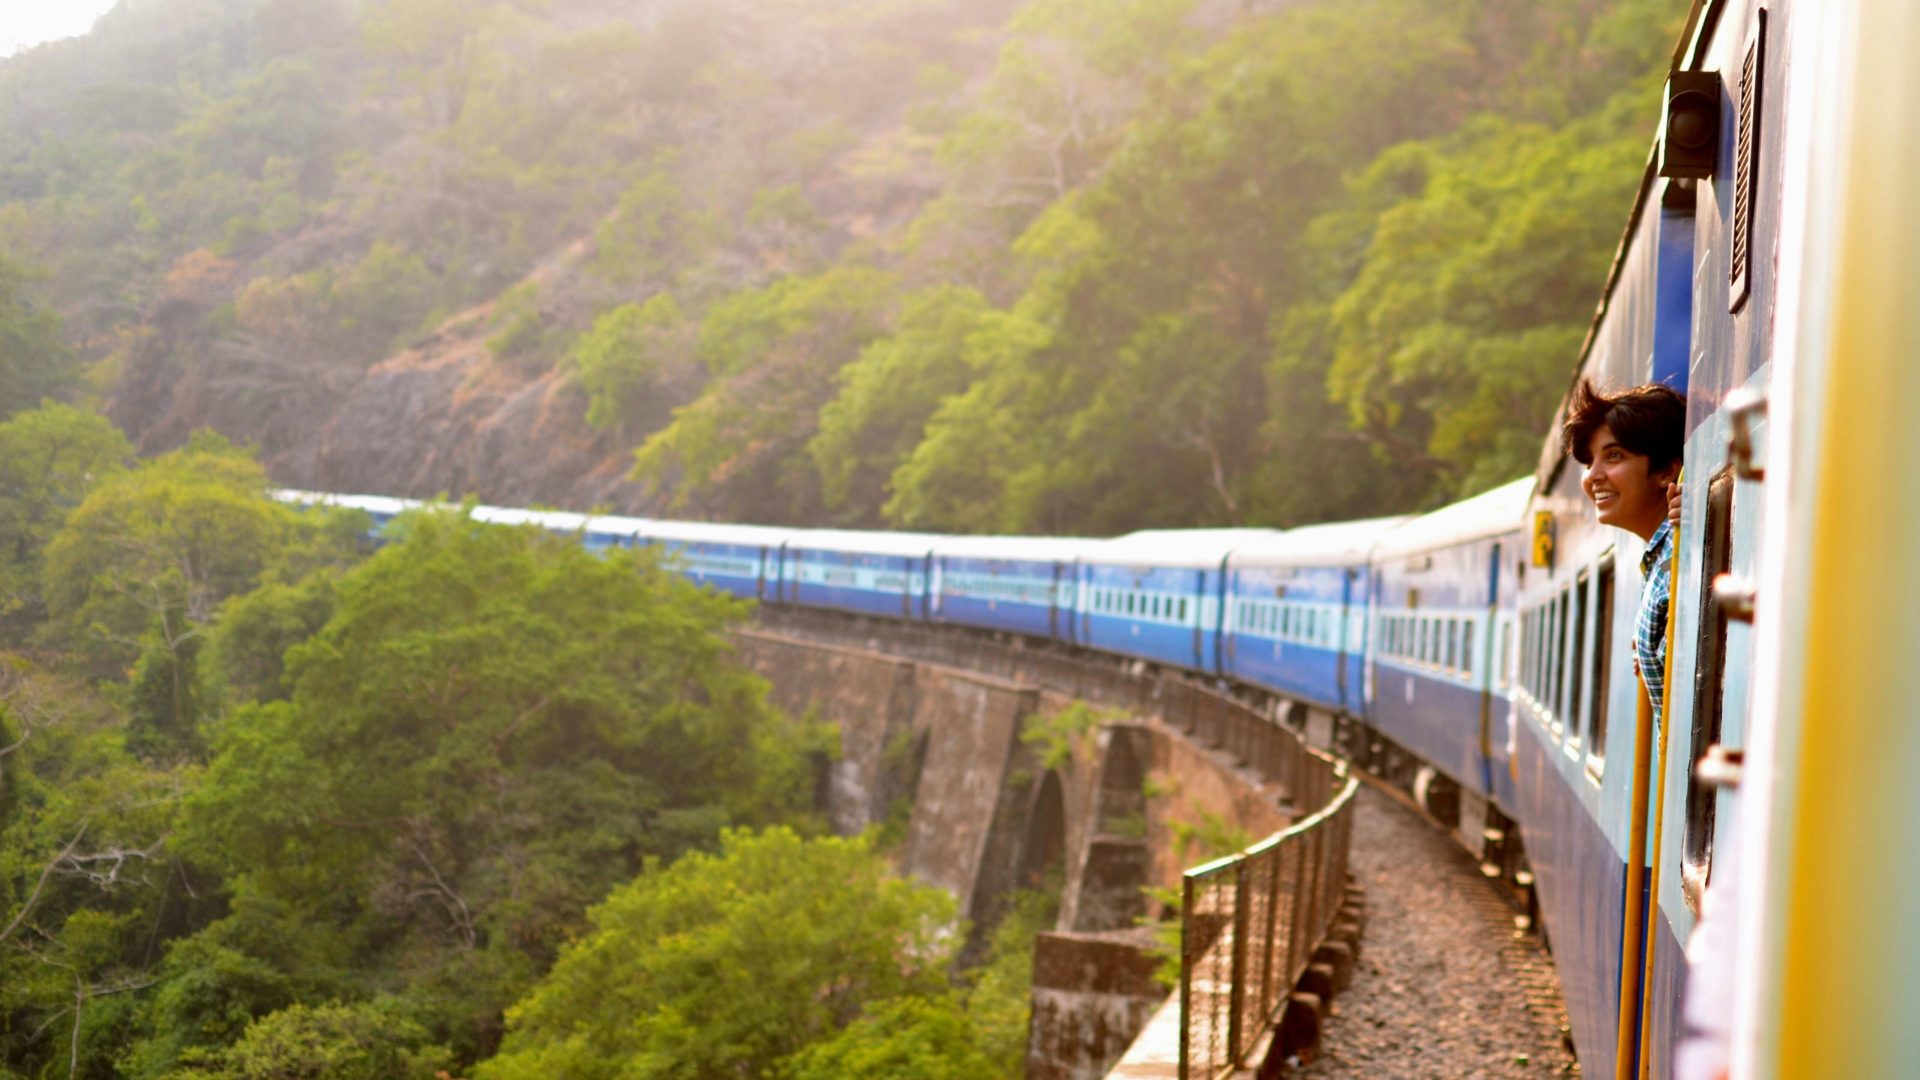 On track: In the age of mass convenience, why are so many of us planning railway adventures?